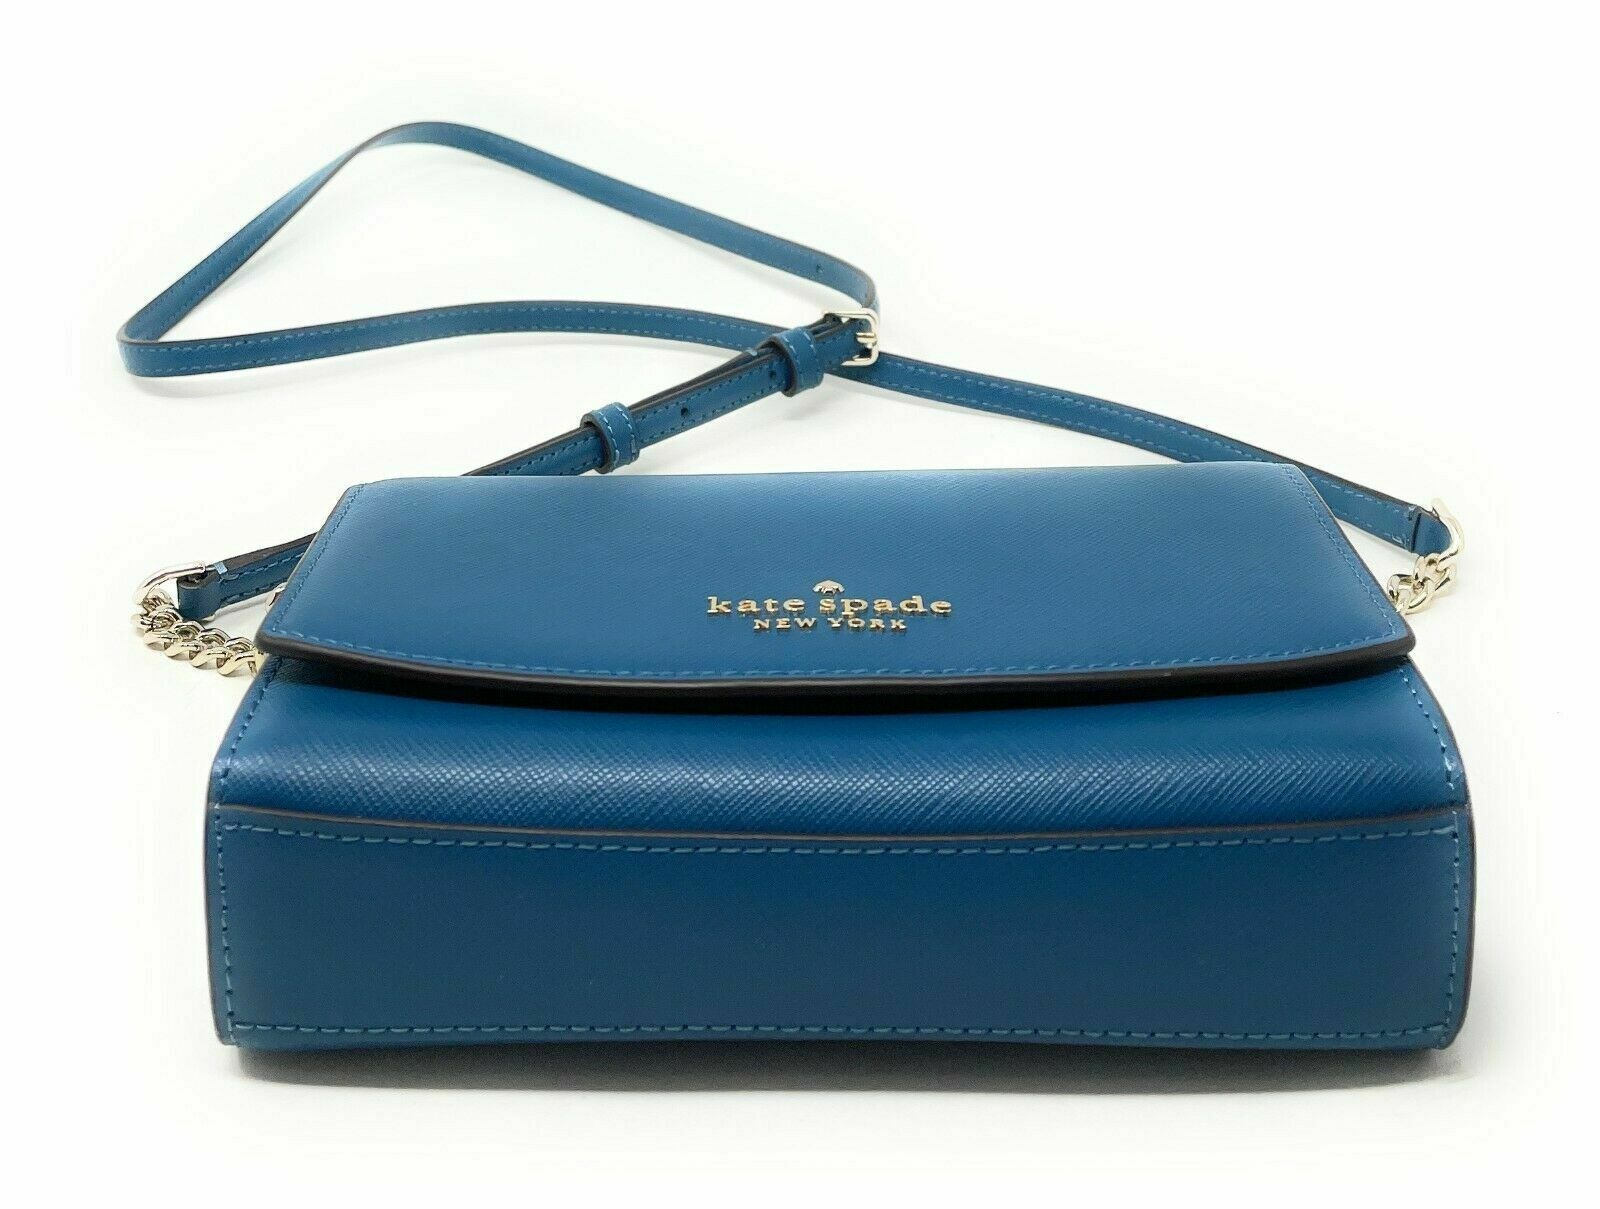 NWT Kate Spade New York Staci Small Flap Leather Crossbody in Warm